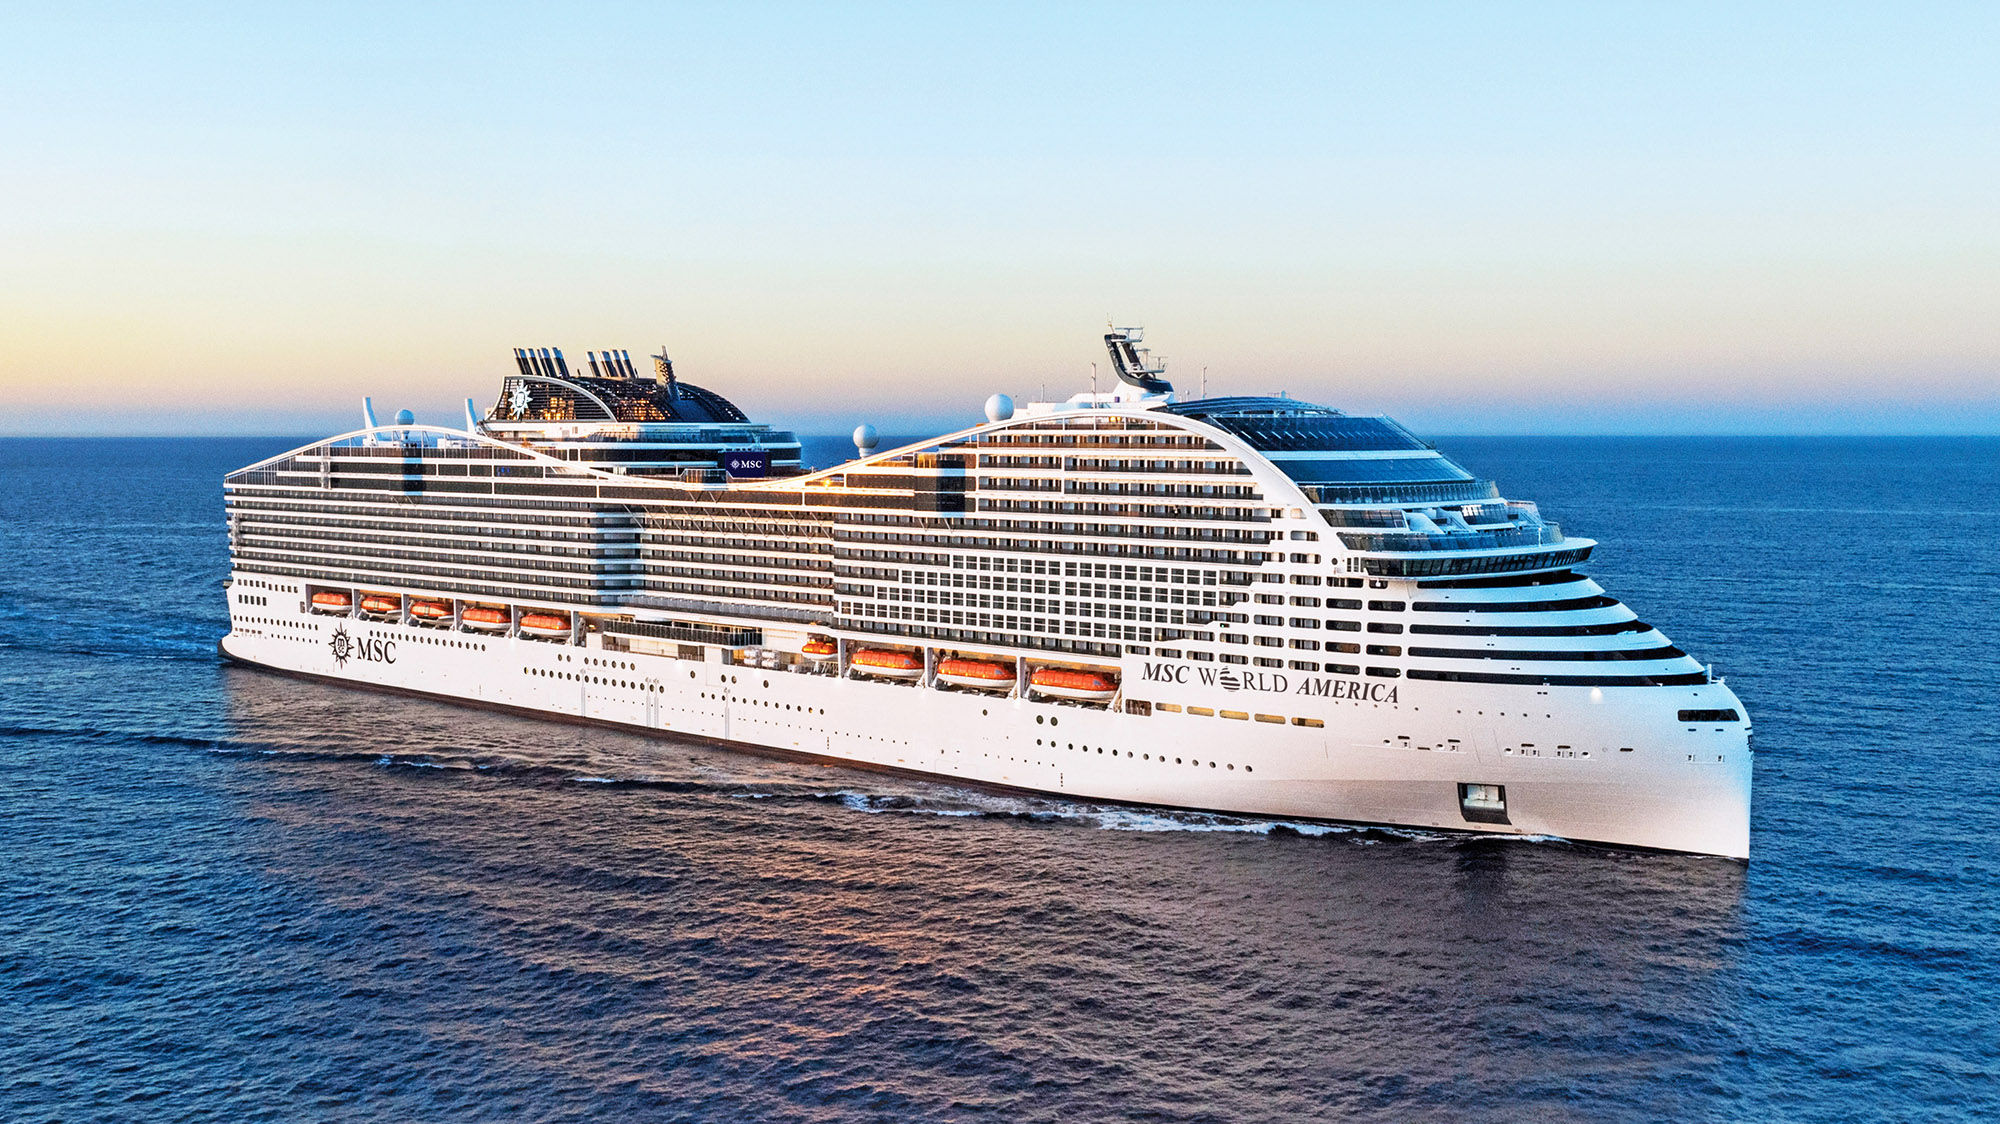 The MSC World America will have seven districts: Travel Weekly